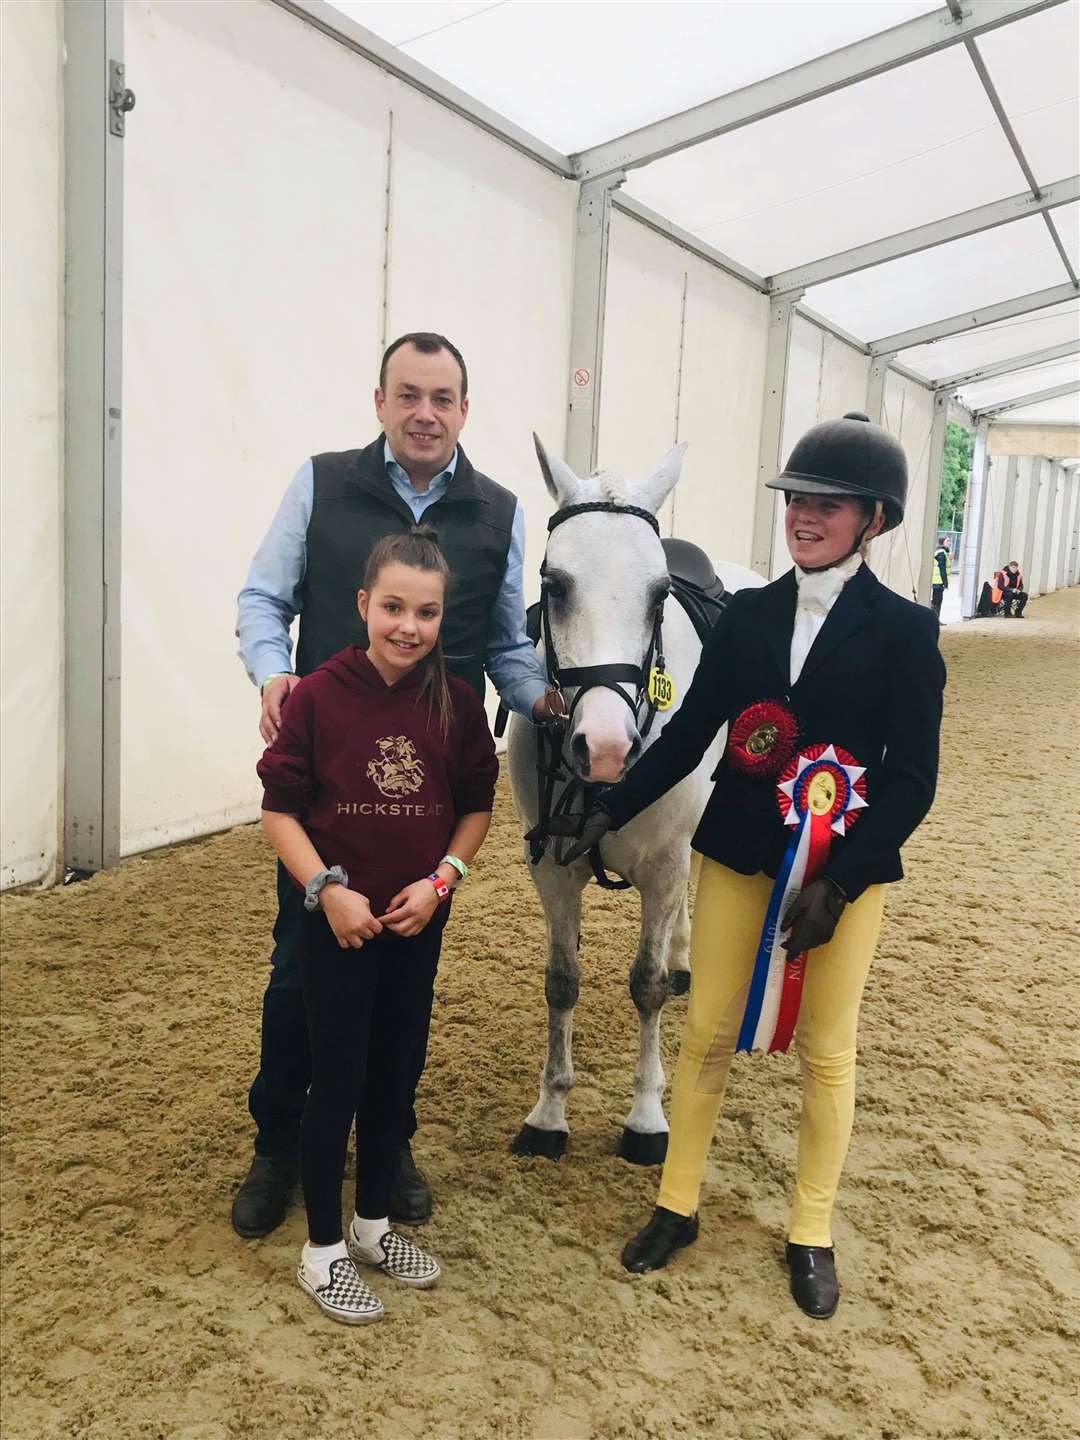 Will Calder, with daughter Jessica who celebrated her 11th birthday at HOYS, along with Coco Bongo and rider Chloe Lemieux.